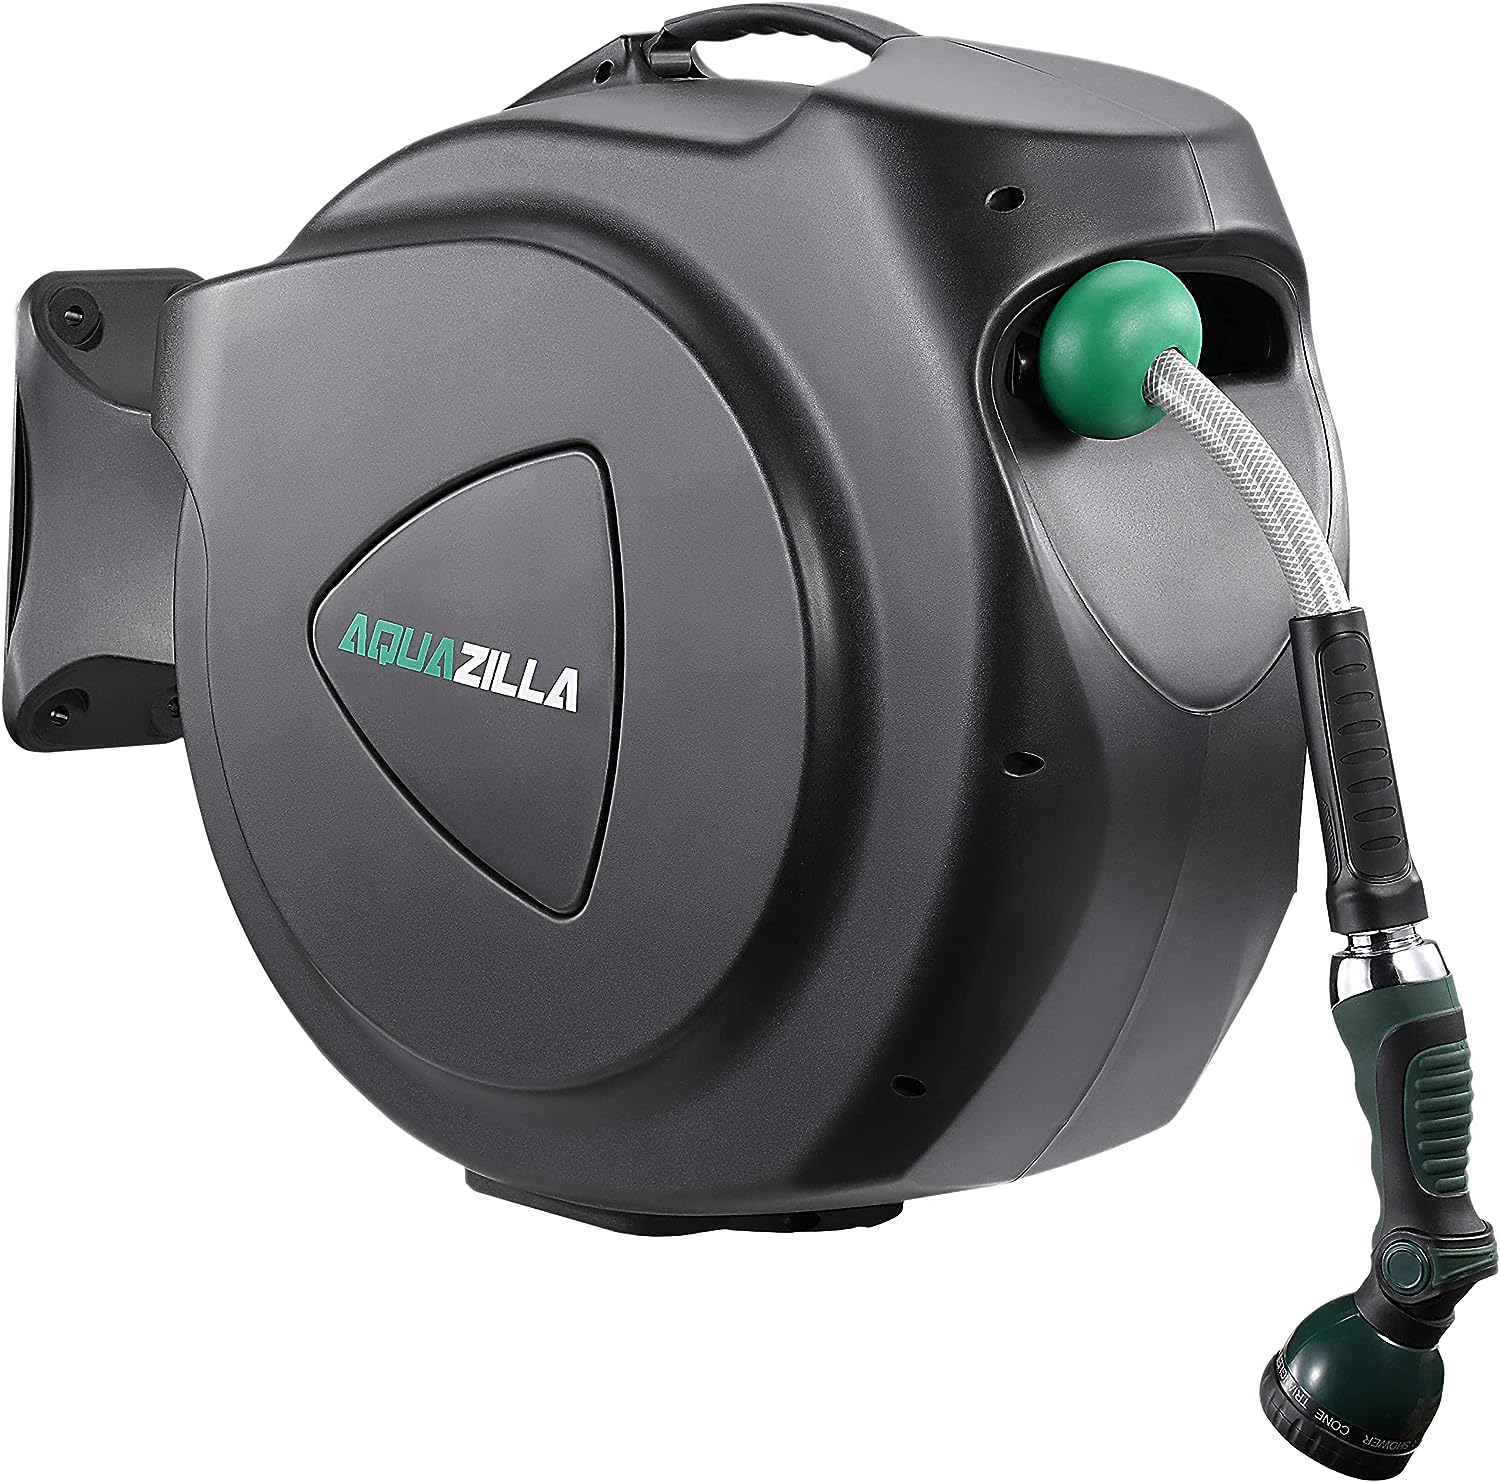 https://bigbigmart.com/wp-content/uploads/2023/10/AQUAZILLA-Retractable-Garden-Hose-Reel-65FT-6FT-5-8-Durable-Wall-Mounted-Water-Hose-Reel-Smooth-Automatic-Rewind-Lock-Hose-in-Any-Lenght-180%C2%B0-Swival-Bracket-9-Pattern-Sprayer..jpg